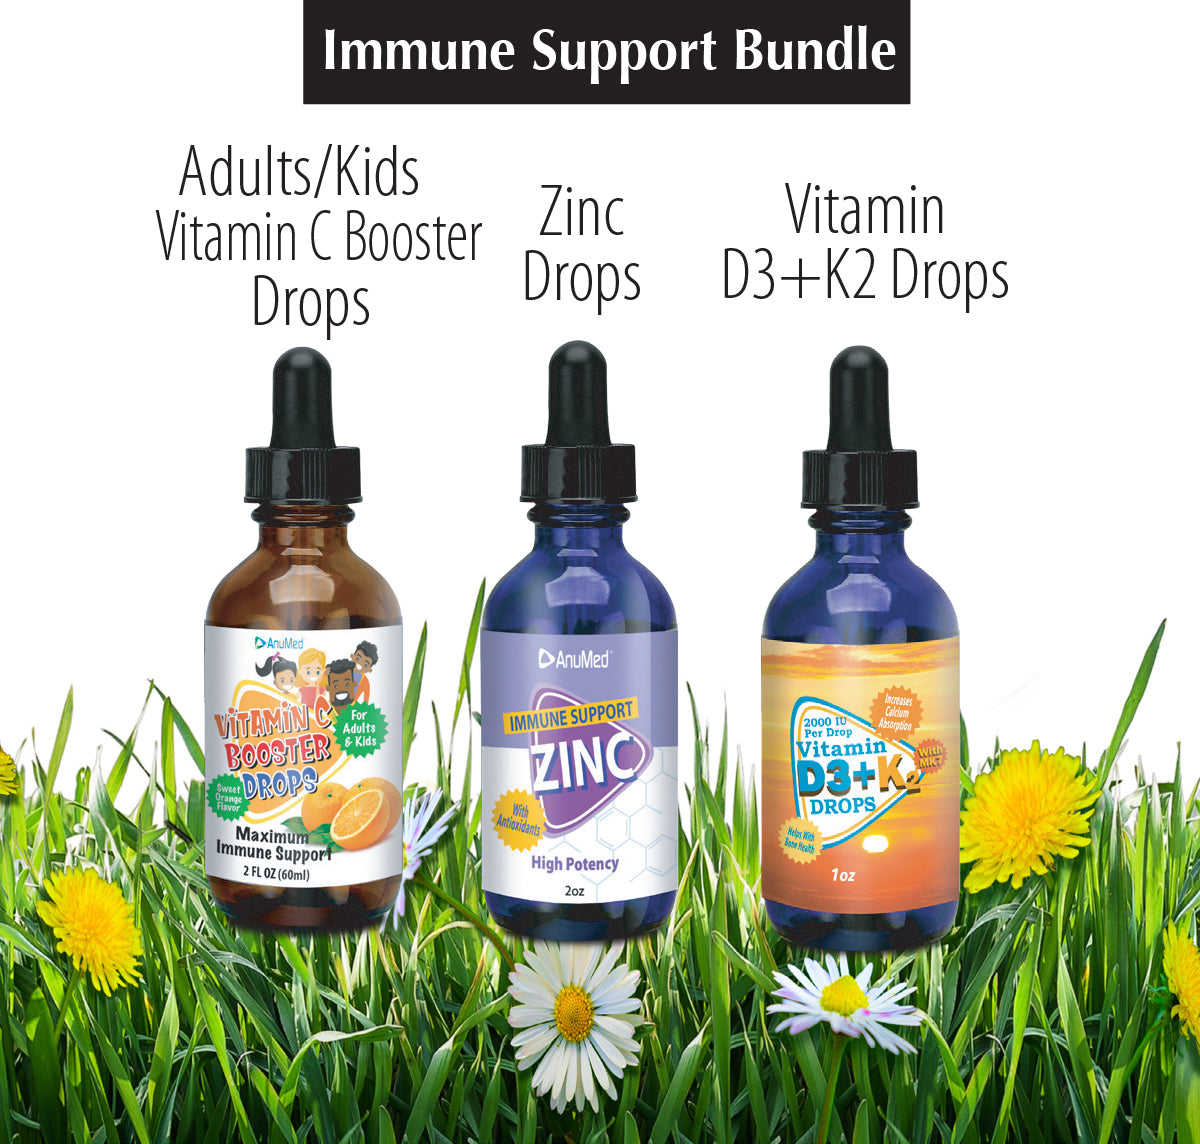 Immune Support Bundle - Vitamin C Drops, Zinc Drops & D3K2 Drops all-in-one | Colds, Flu & Infections | Supports helping the body stay strong